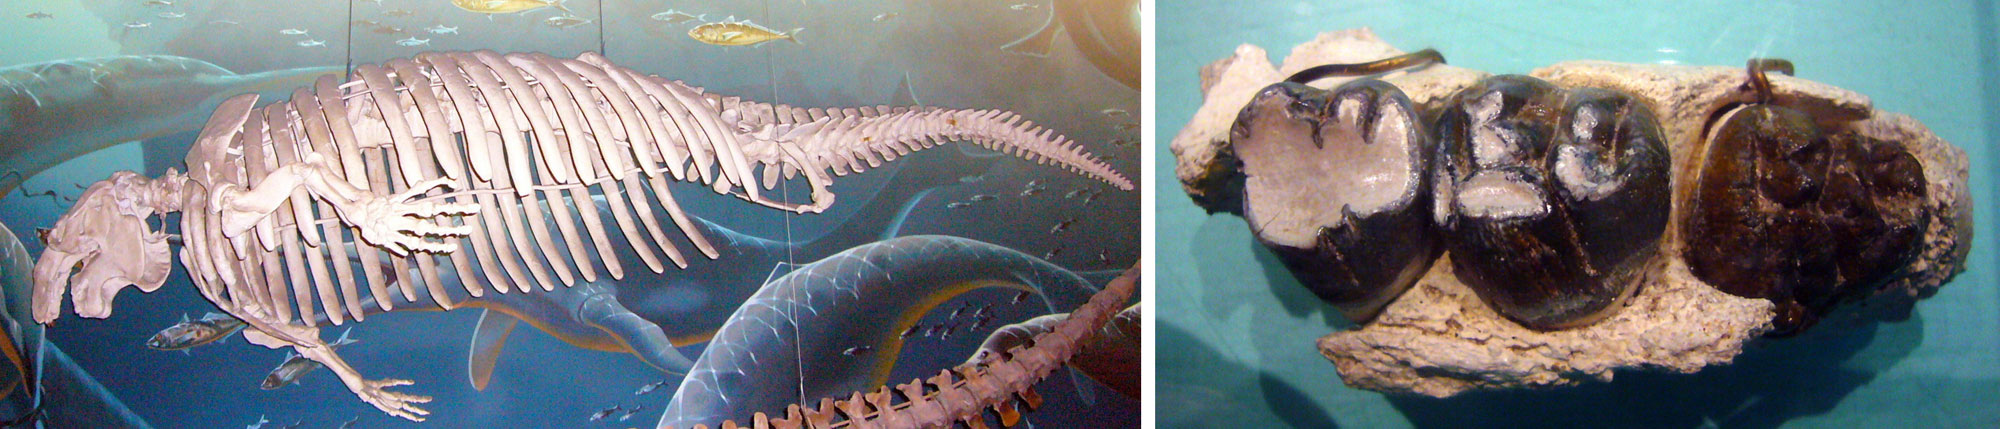 2-Panel image showing photos of a fossil dugong. Panel 1: Complete skeleton on display at the US National Museum. Panel 2. Portion of jaw showing three teeth.